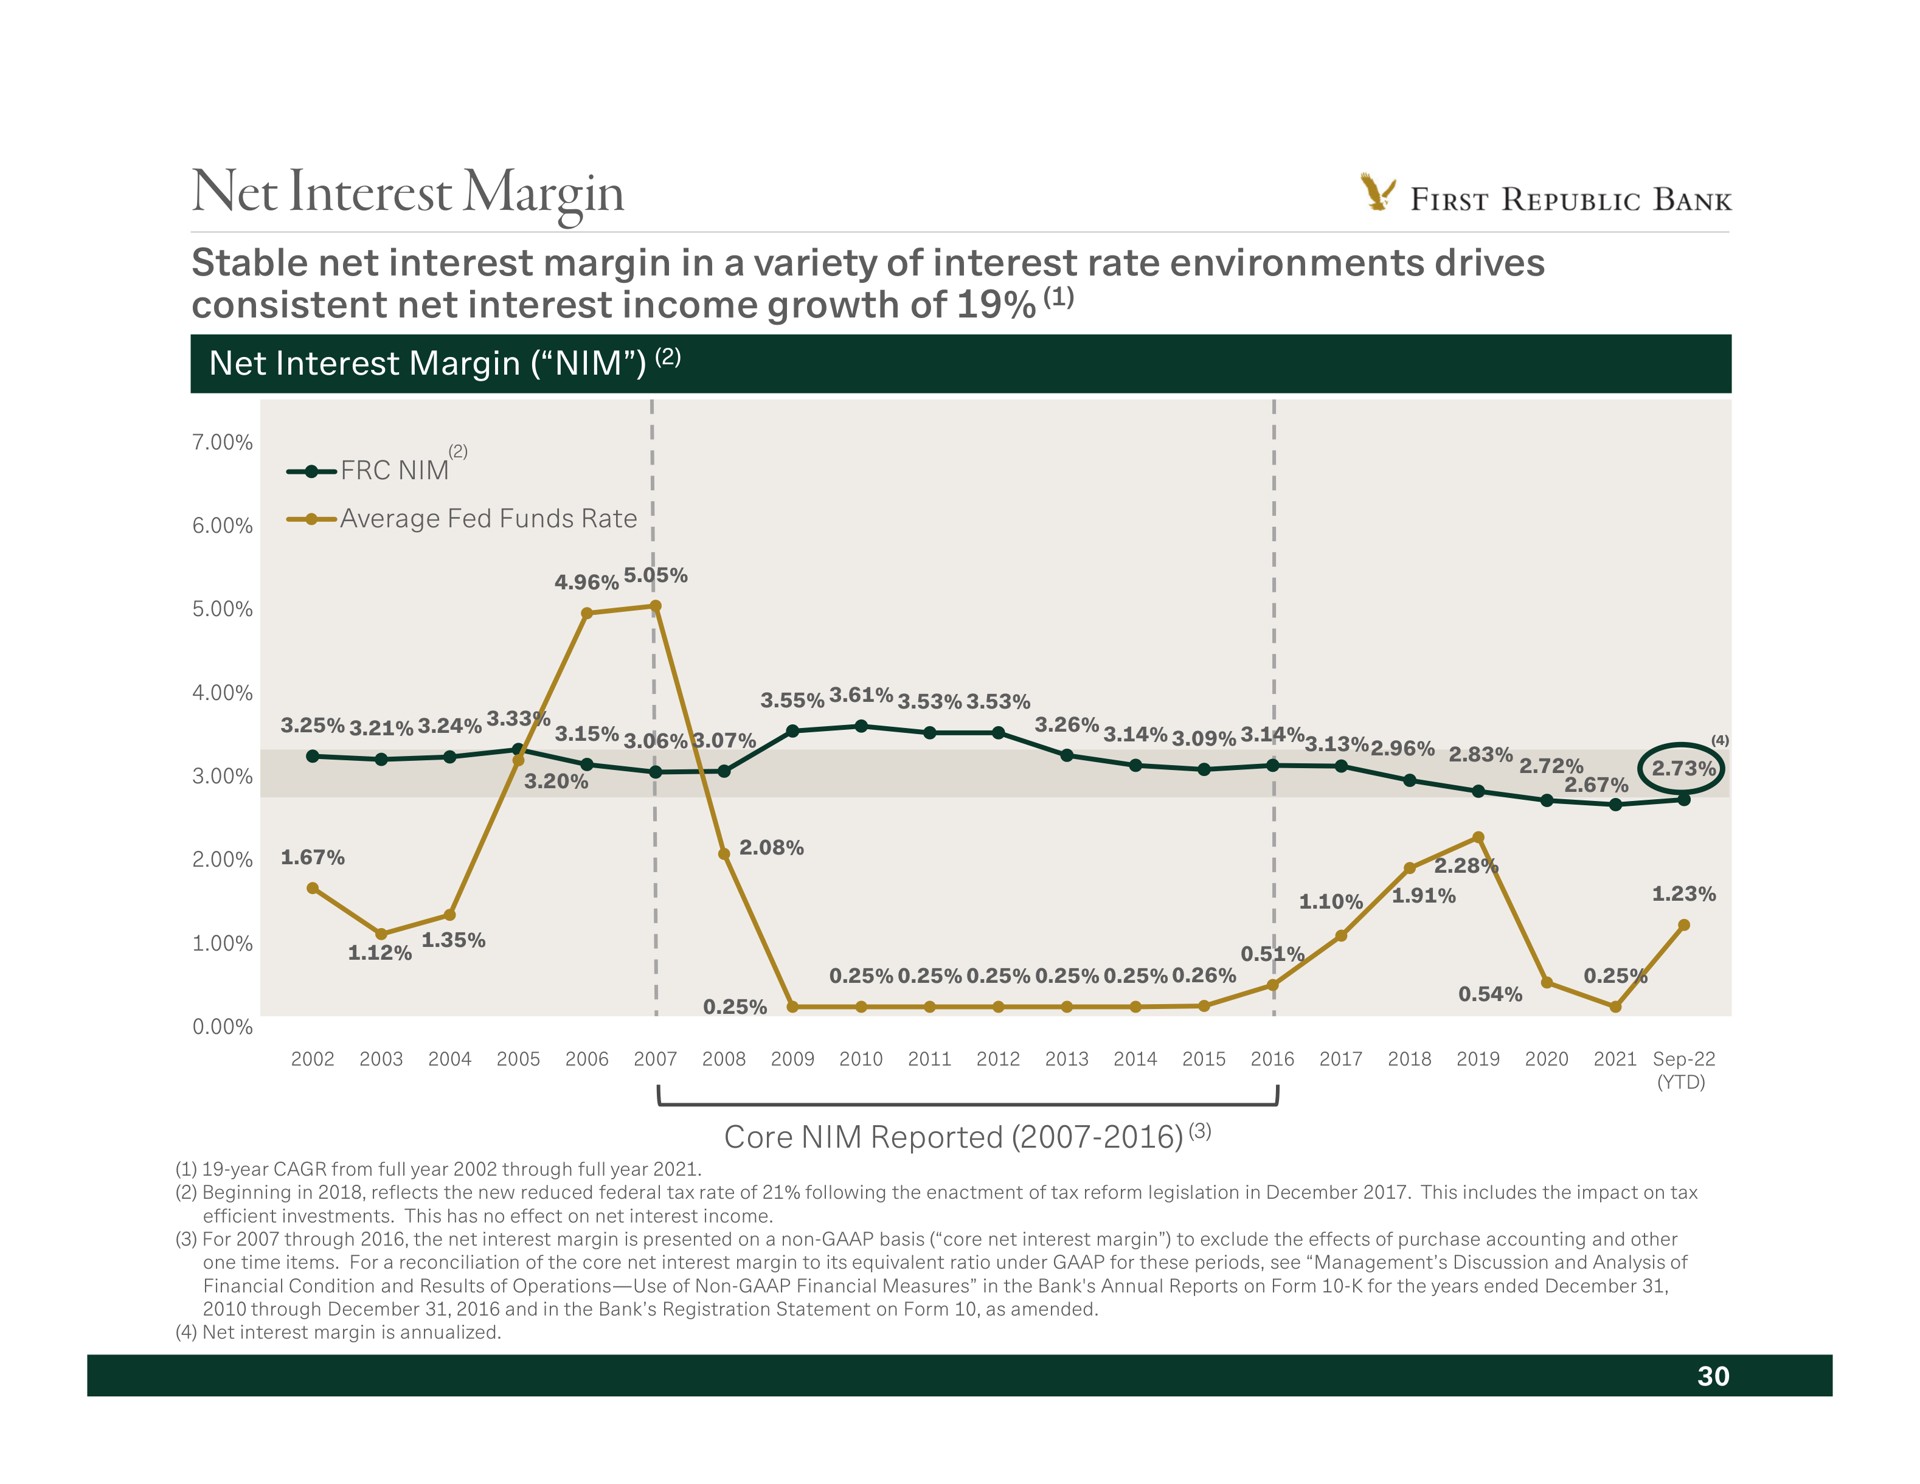 net interest margin stable in a variety of rate environments drives consistent income growth of | First Republic Bank